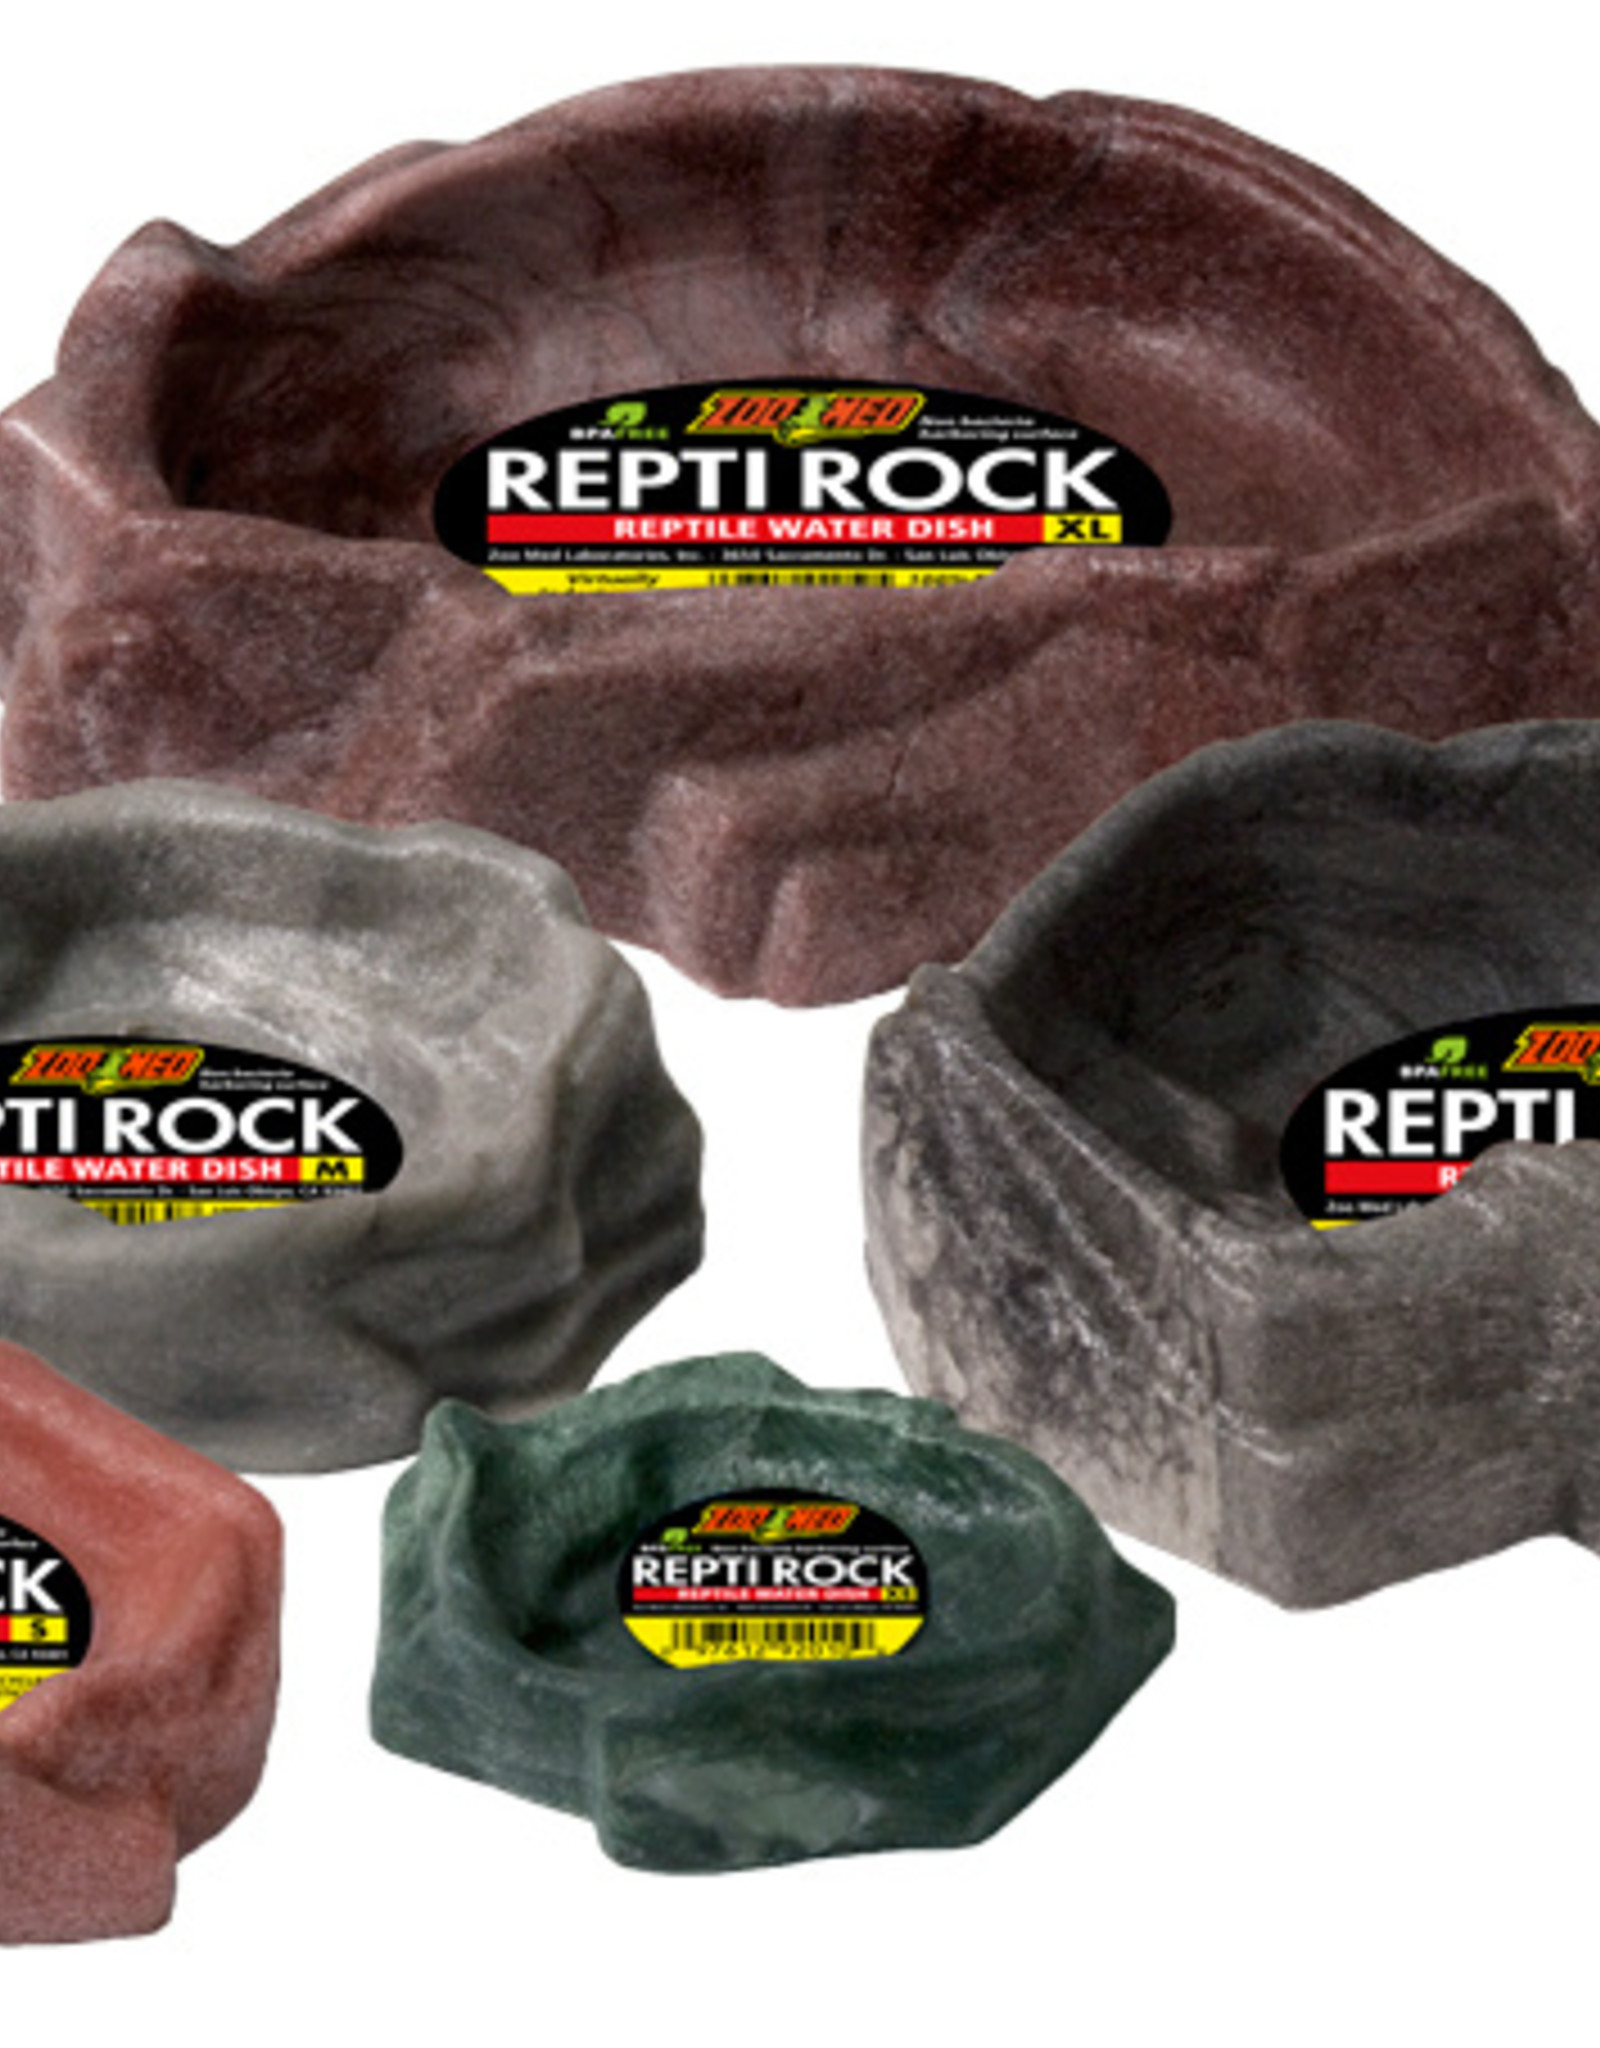 ZOO MED LABS INC ZOOMED REPTI ROCK REPTILE WATER DISH LARGE